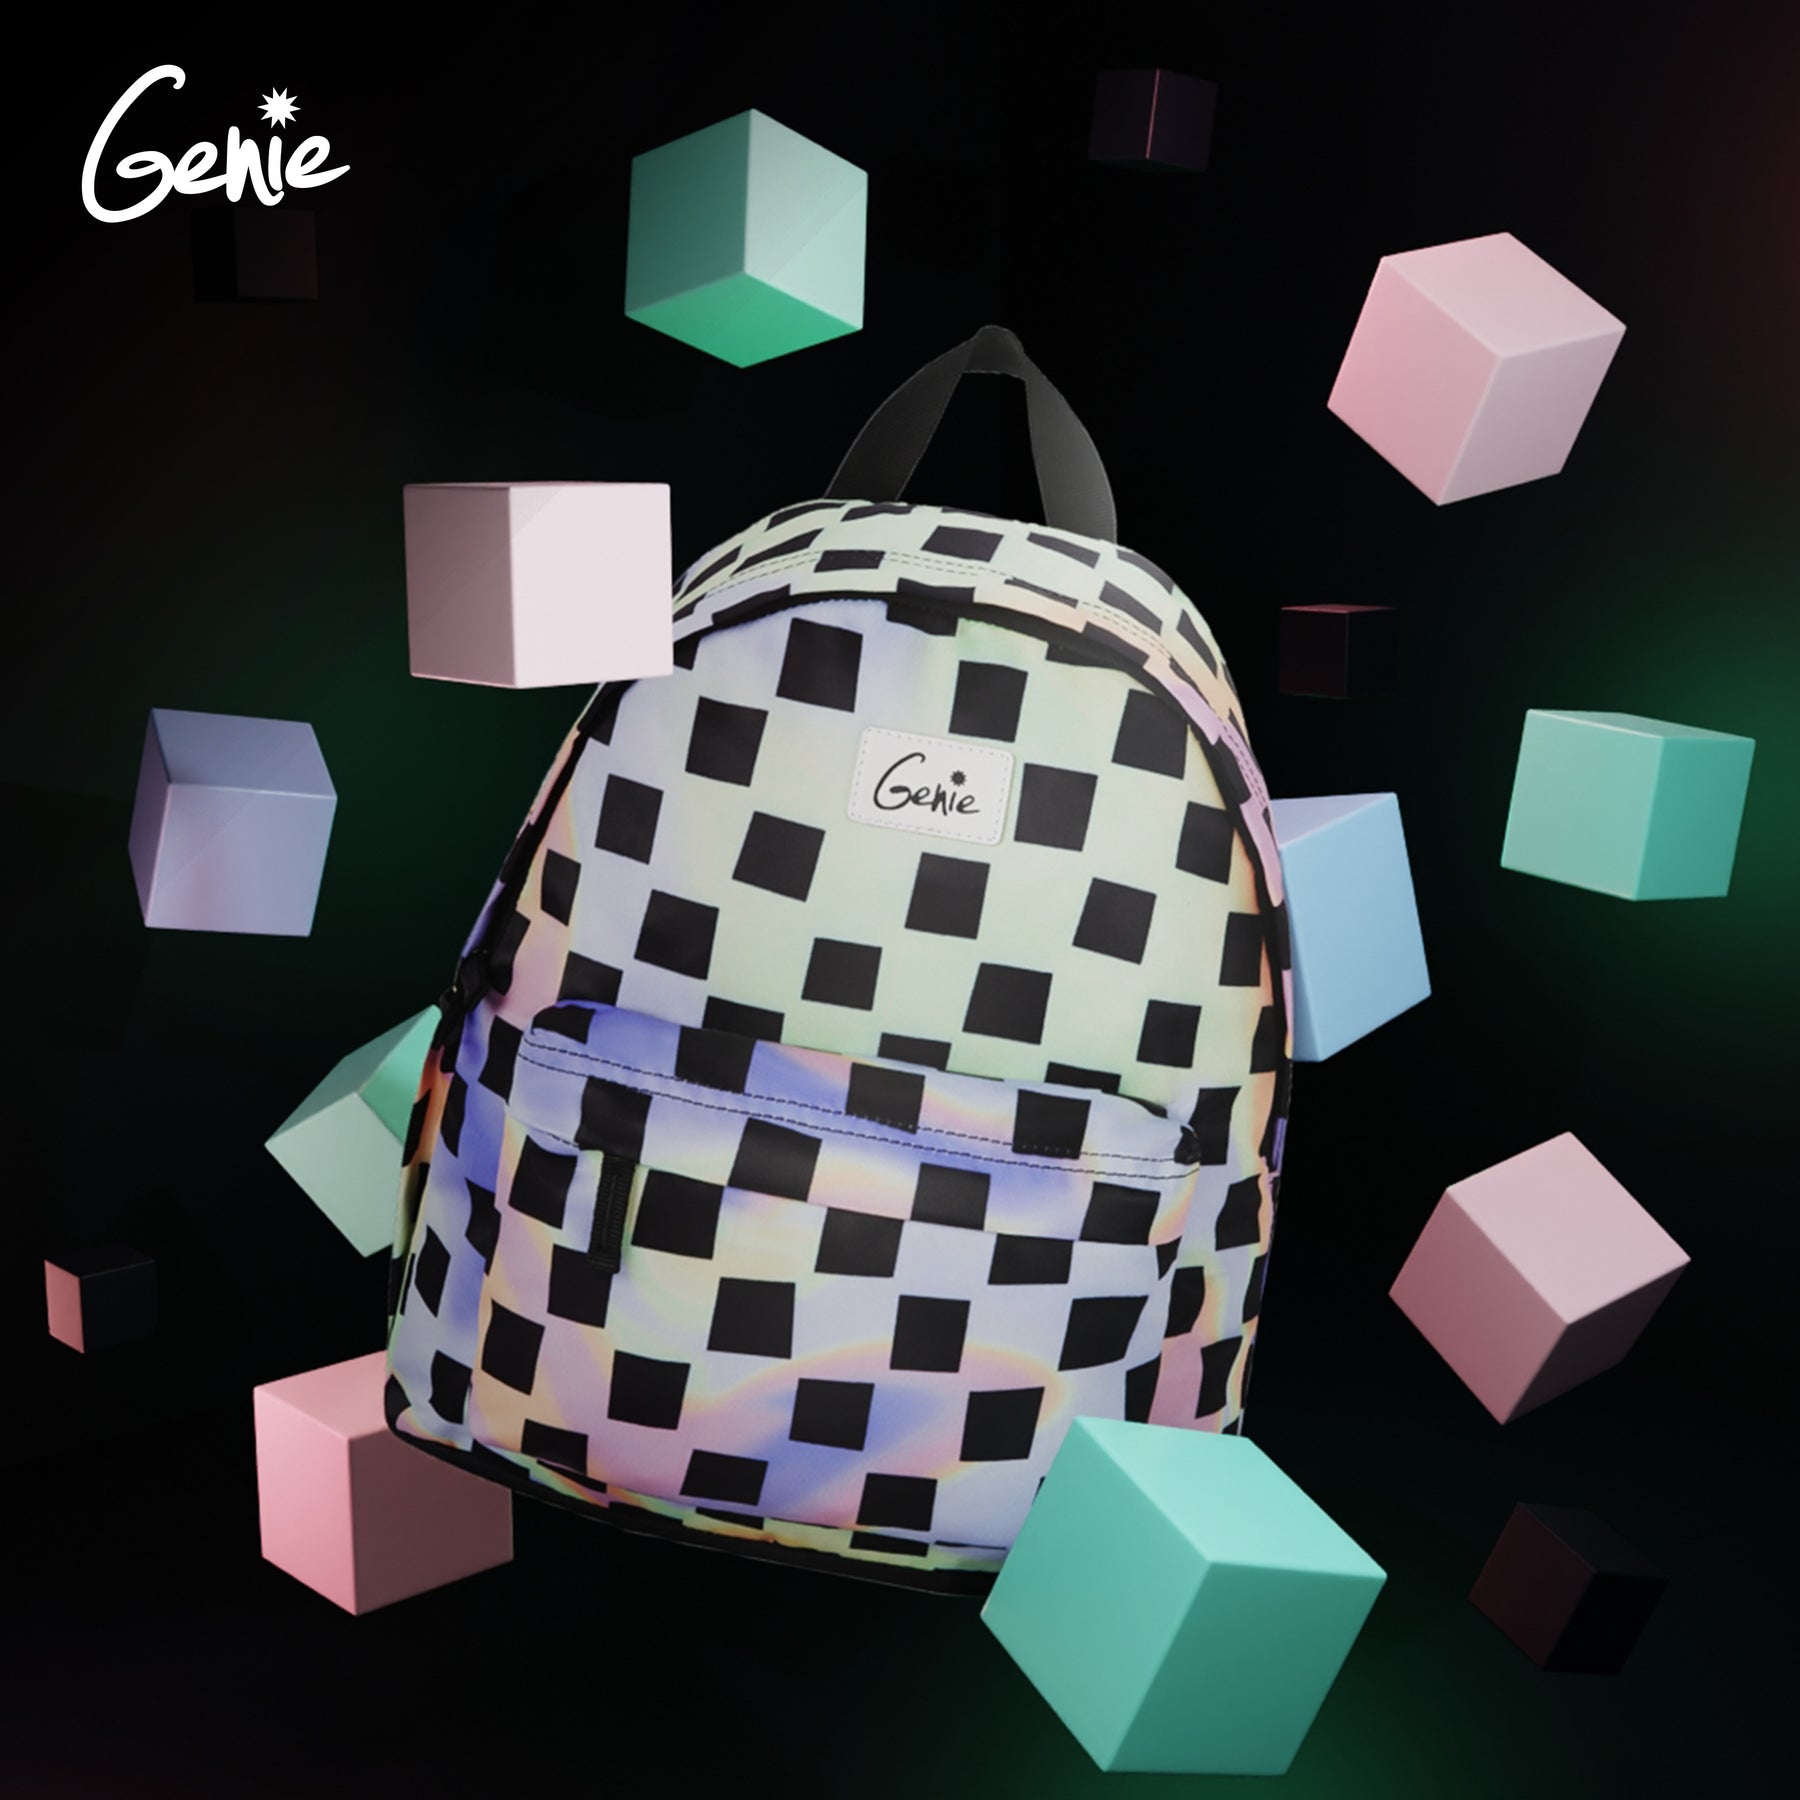 Iridescence Small Laptop Daypack - Multicolor